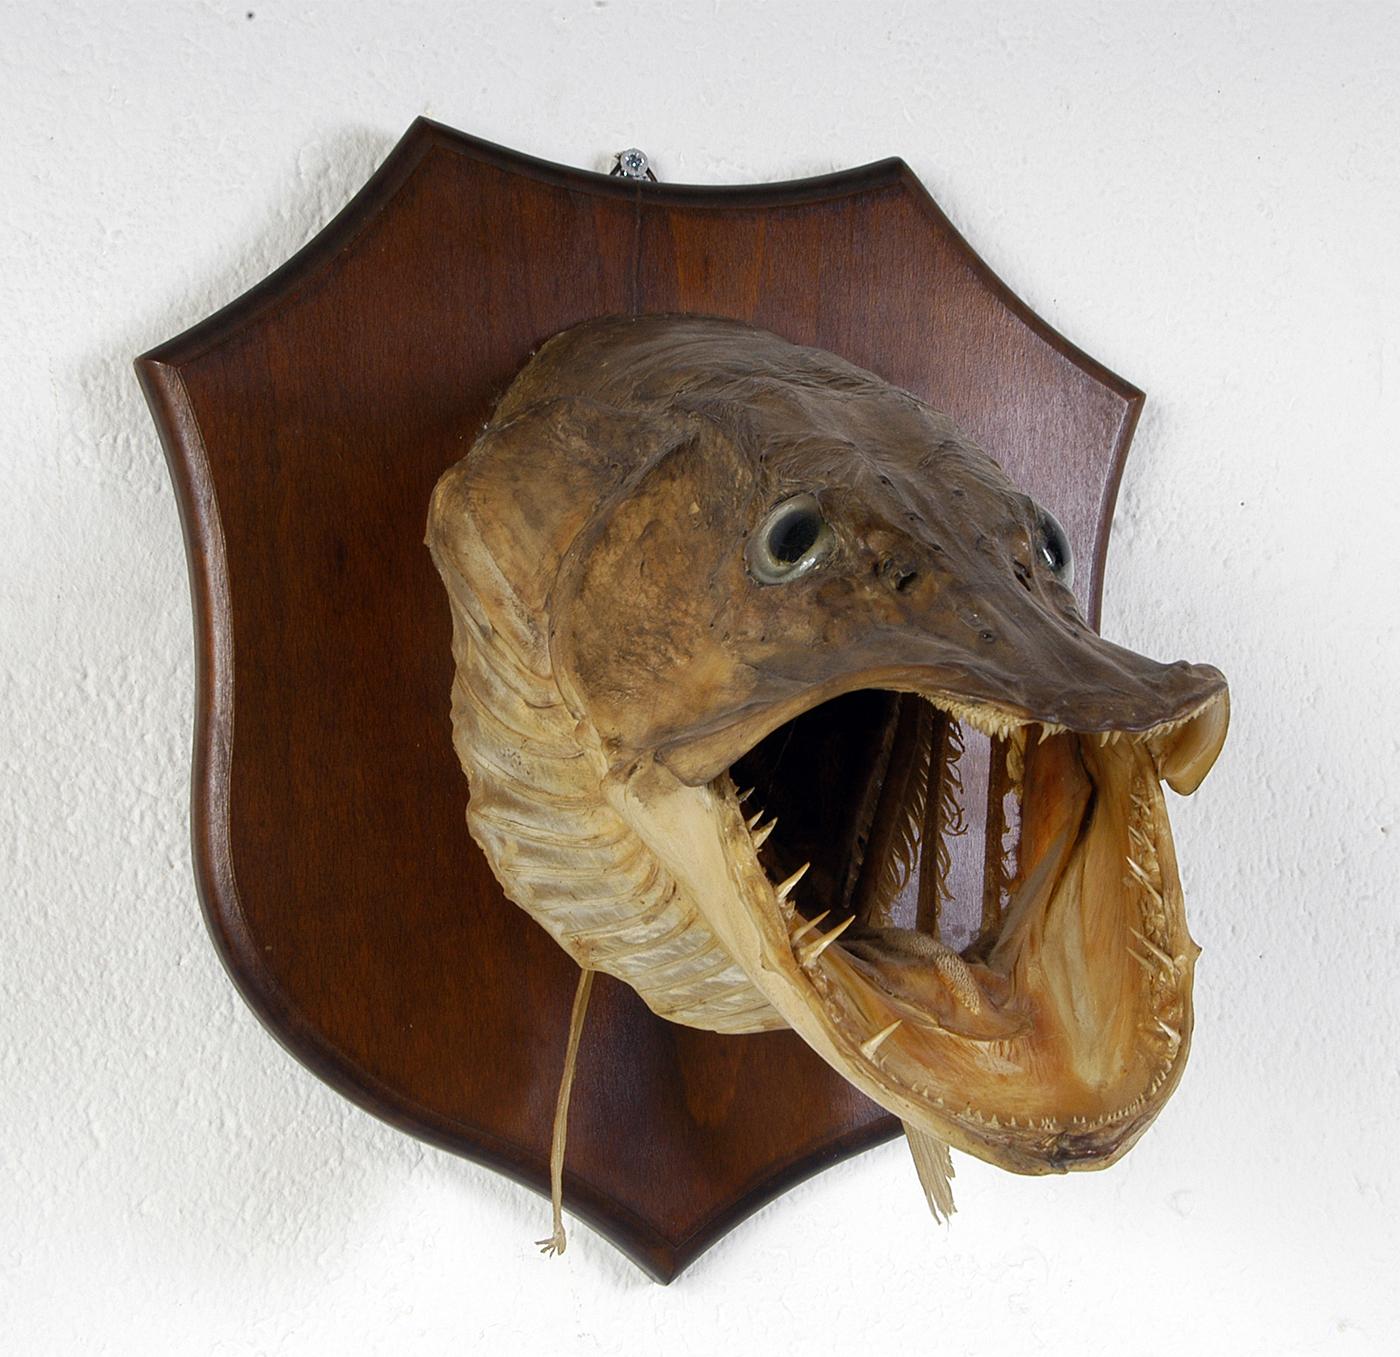 A wonderfully decorative Pike’s head presented with its mouth agape to show off its truly fearsome arrangement of teeth, mounted on a mahogany shield. Quite a handsome taxidermy example as far as Pike's head's go! Good color and very well presented